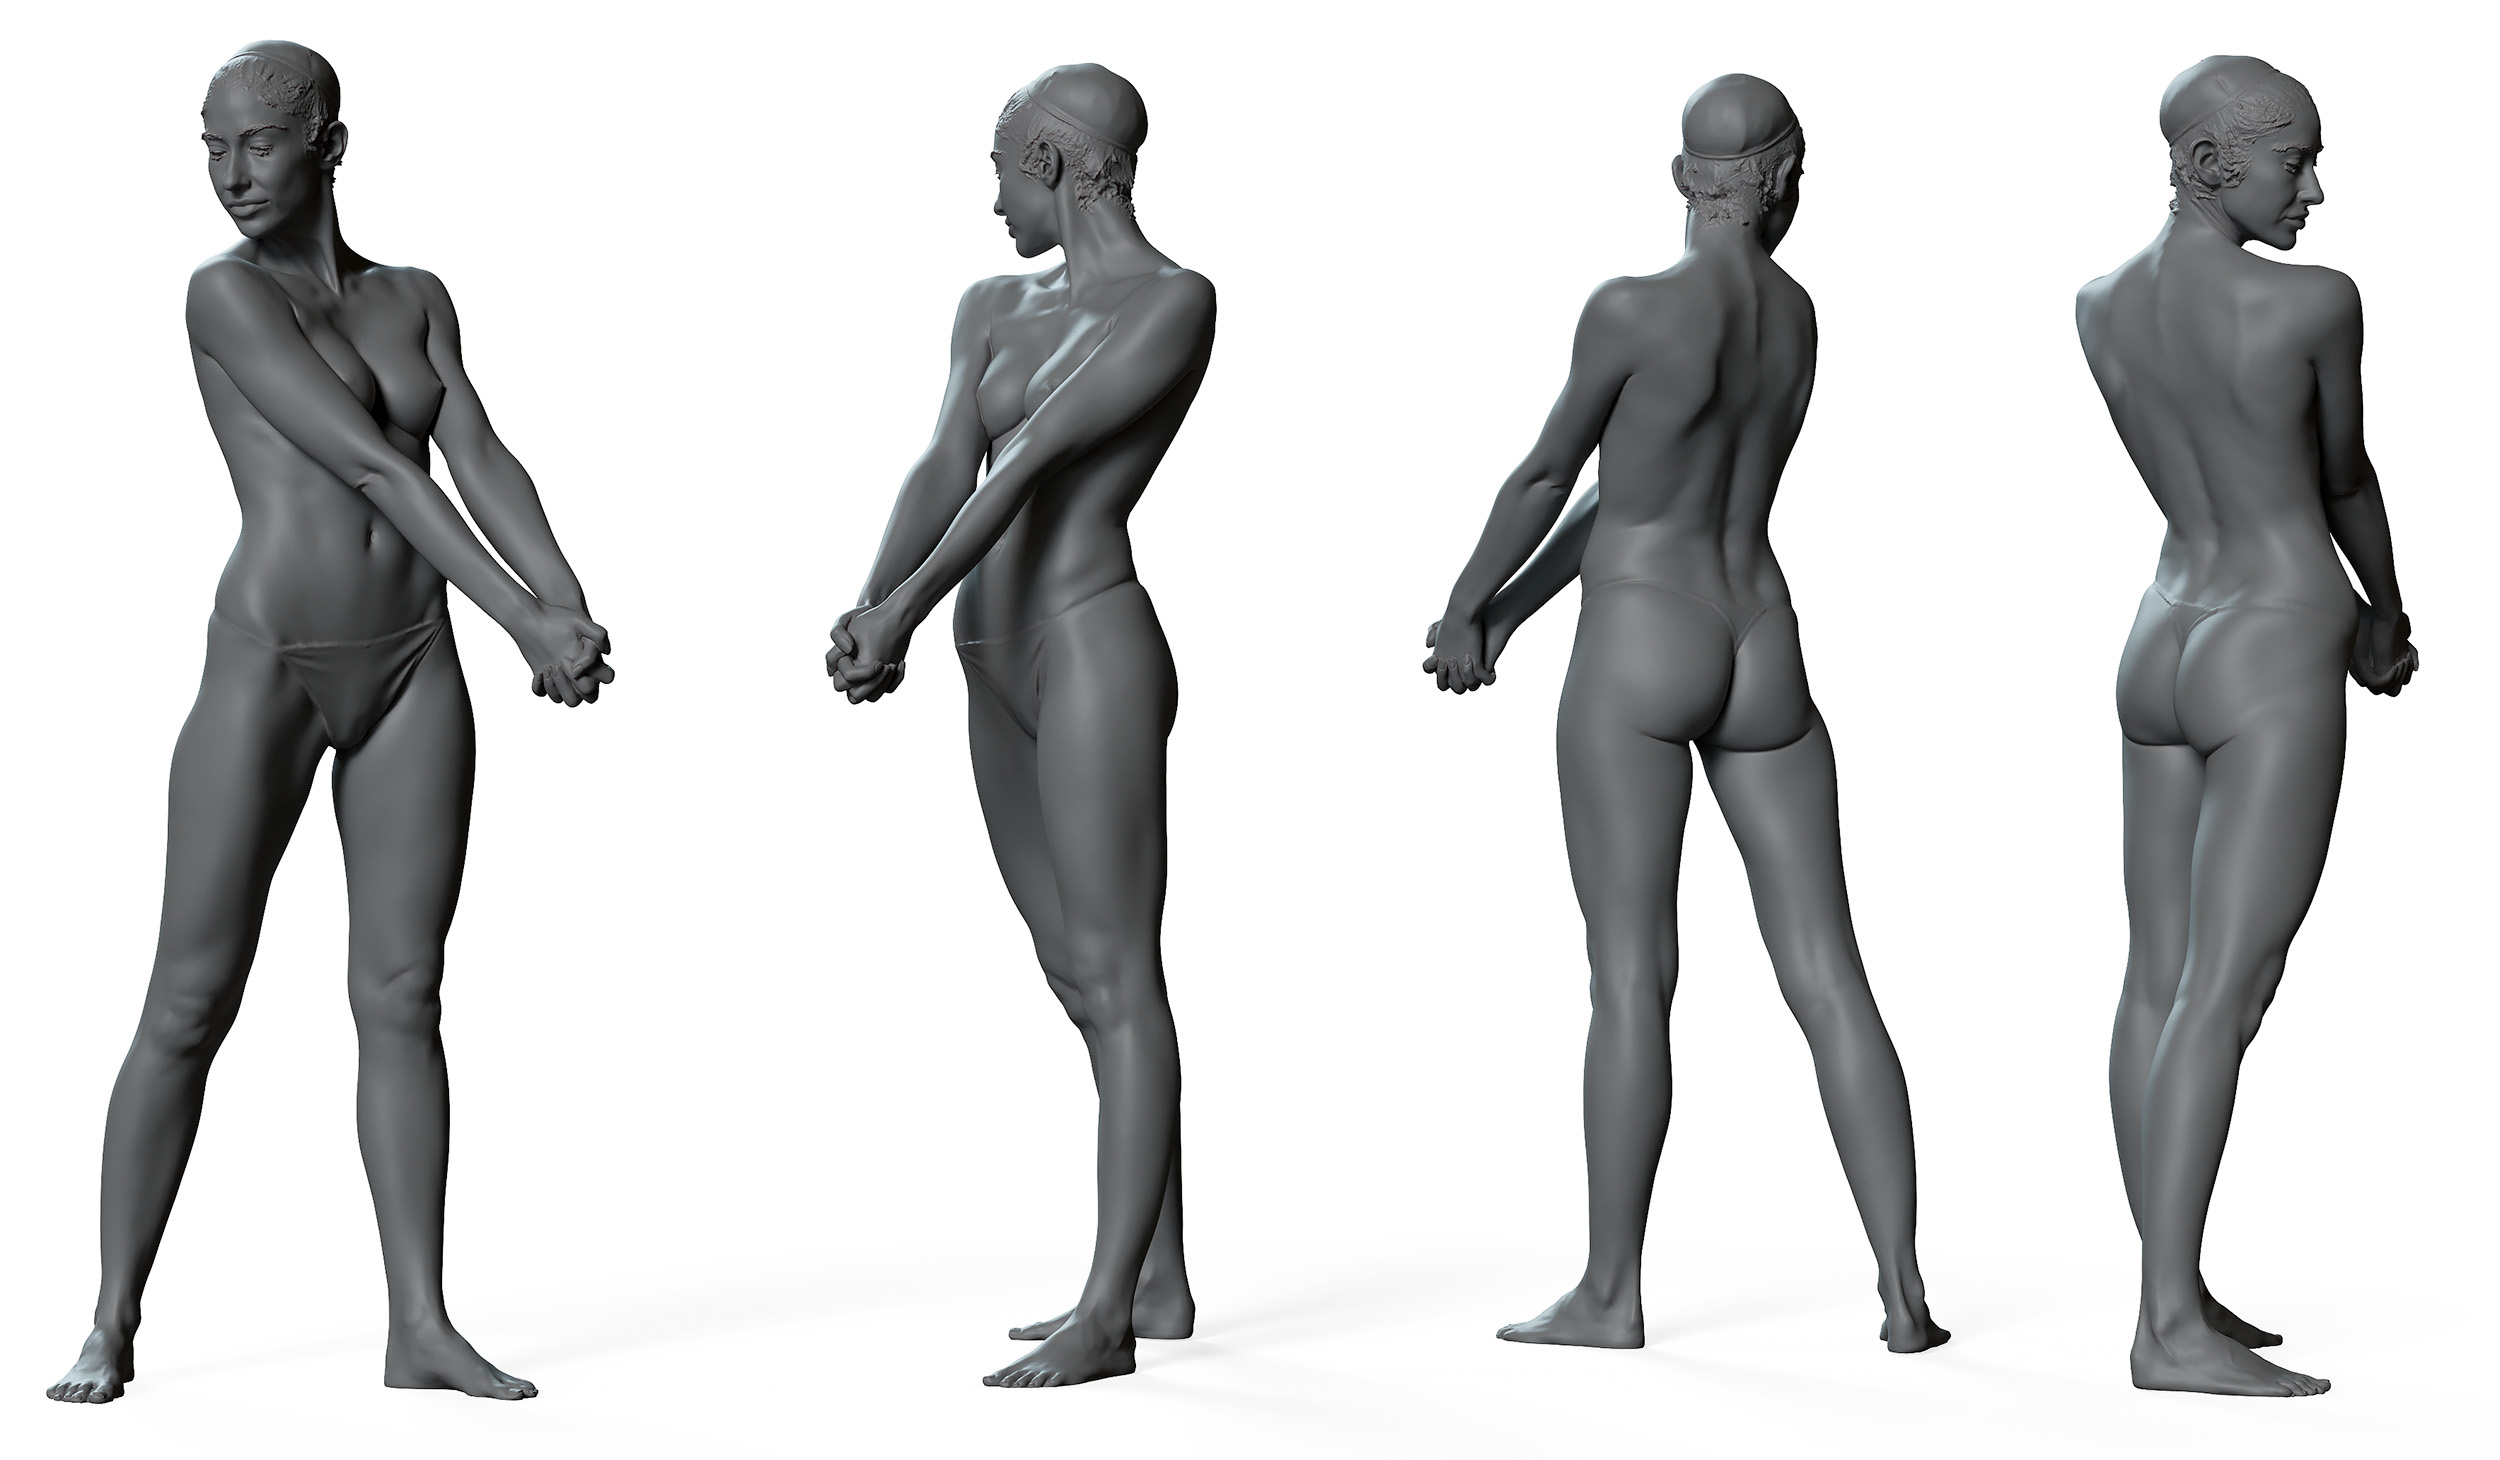 Sketch2Pose: Estimating a 3D Character Pose from a Bitmap Sketch